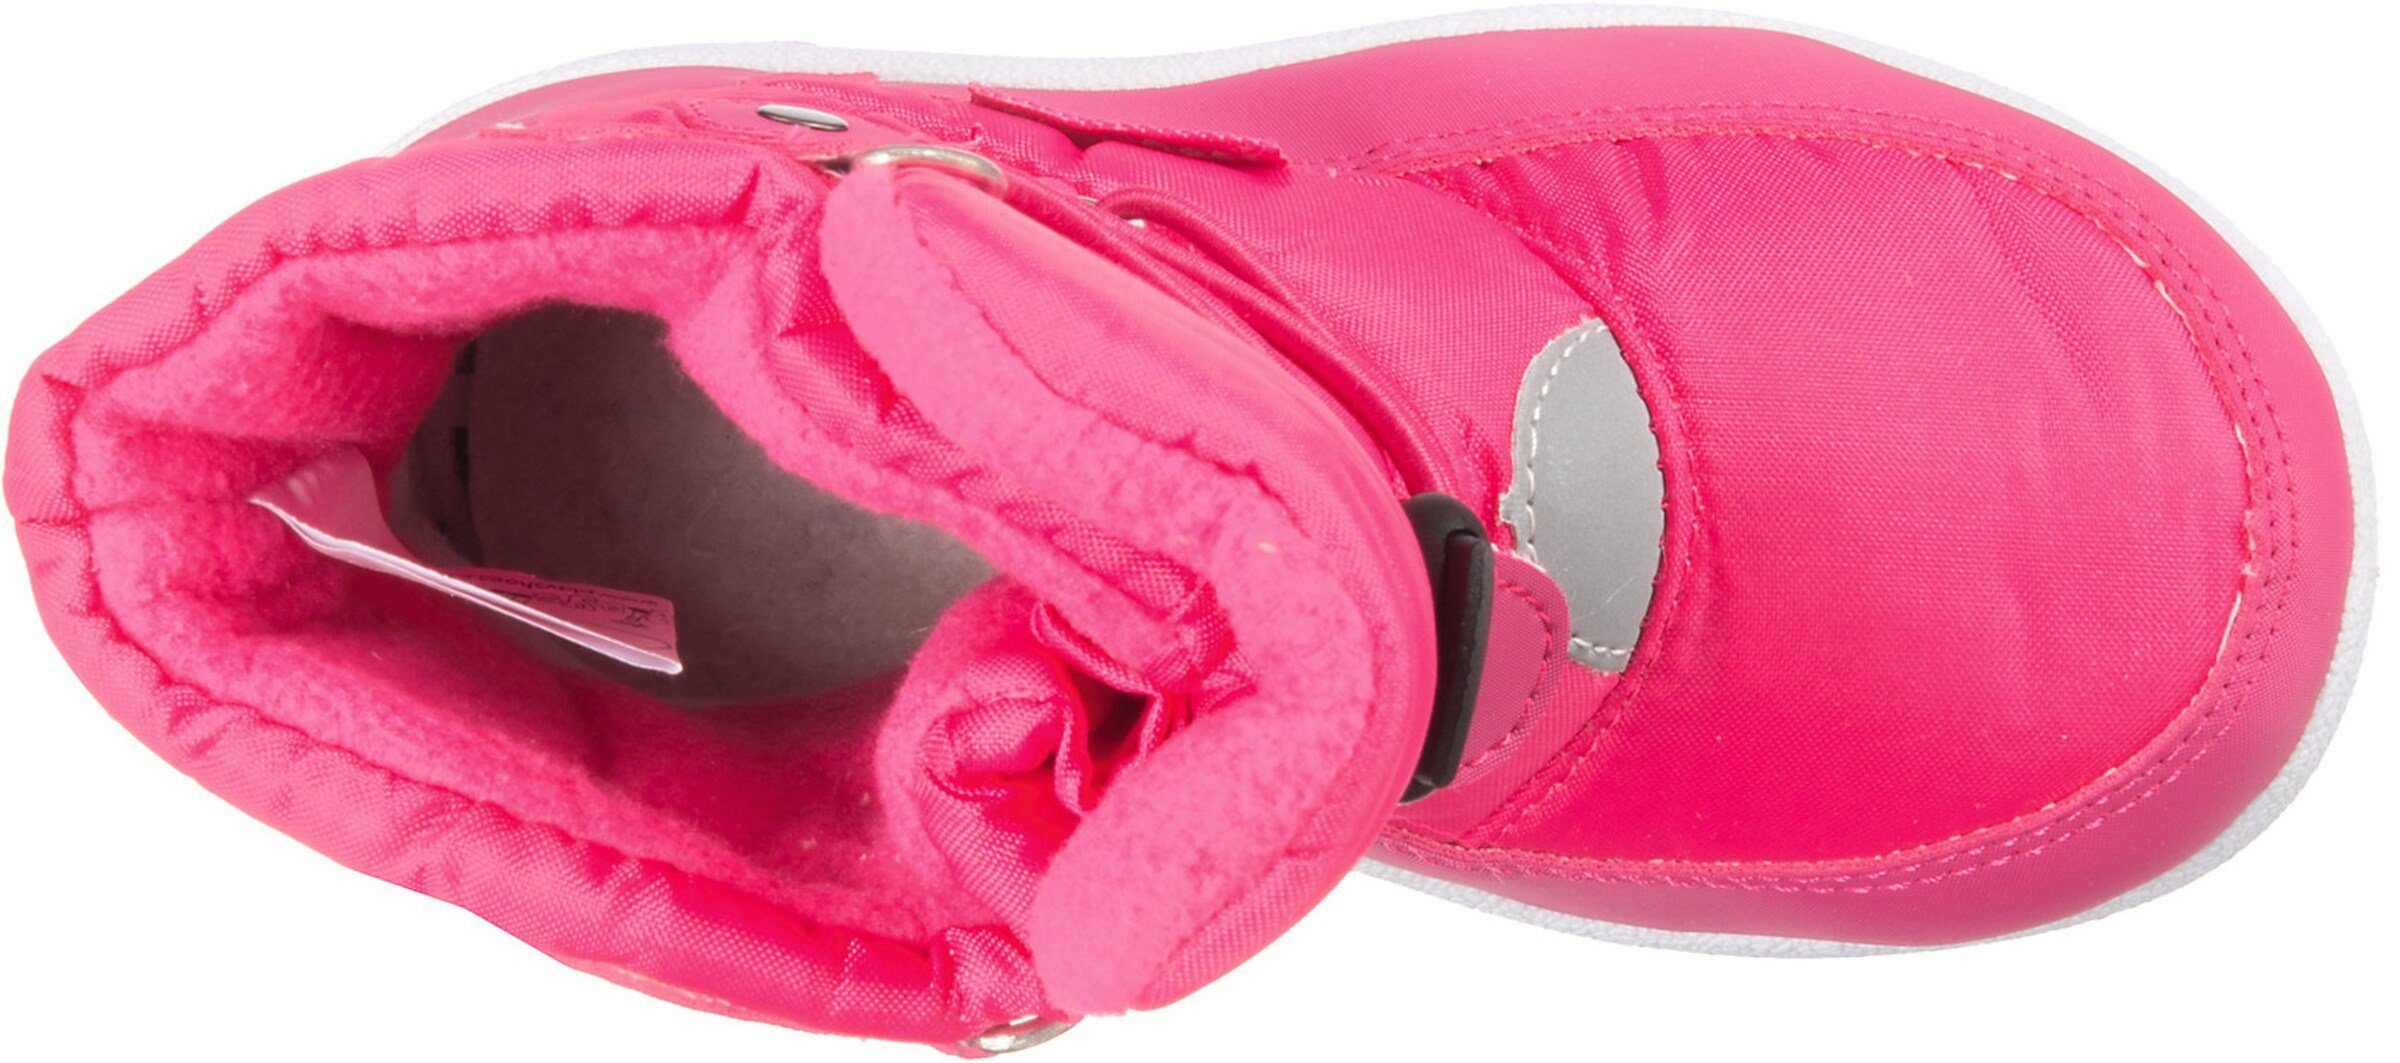 (1-tlg) Pink Snowboots Playshoes